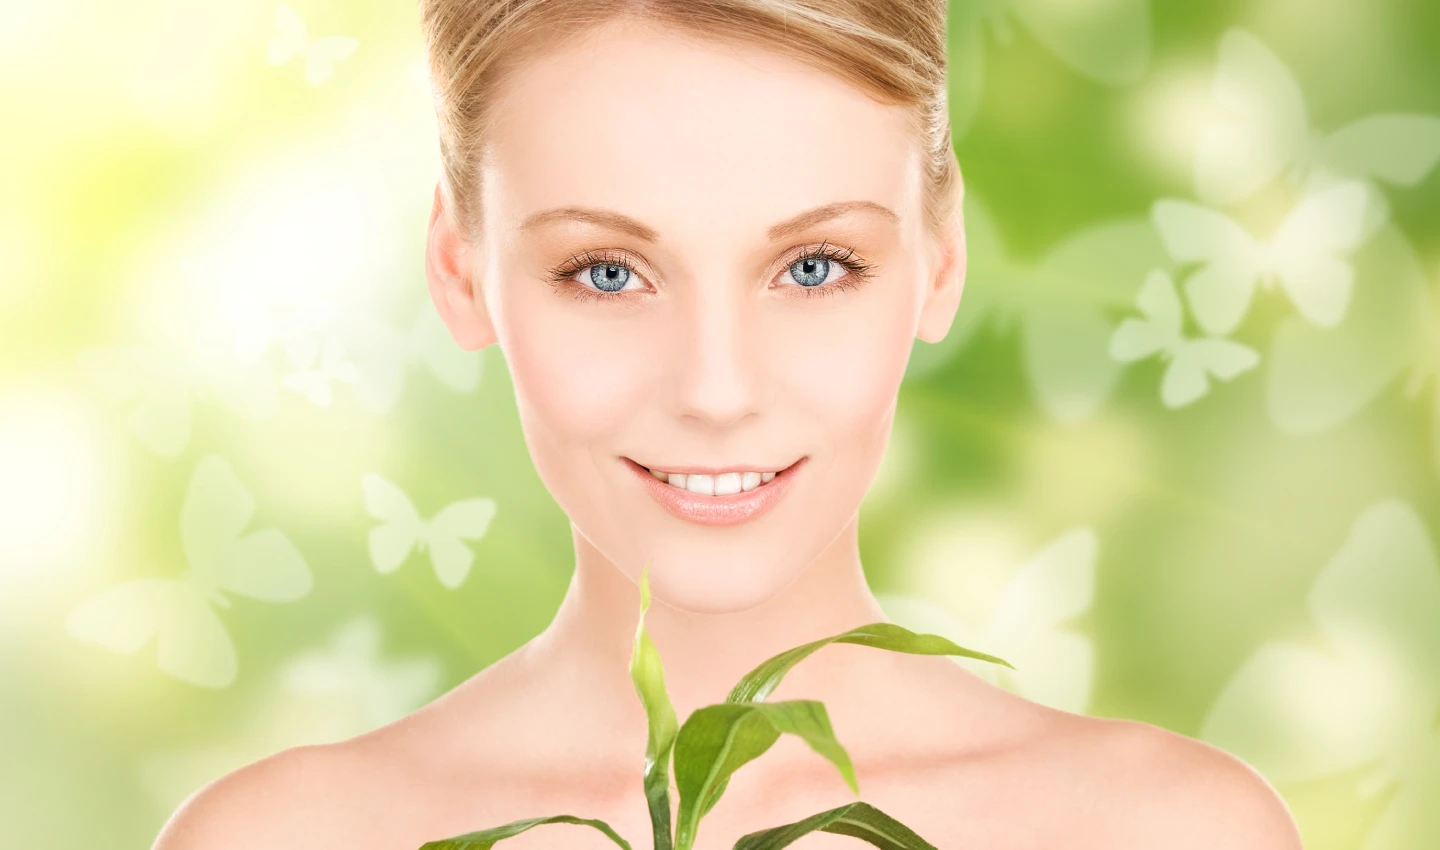 A young woman with a glowing complexion smiles at the camera against a backdrop of plants and greenery.